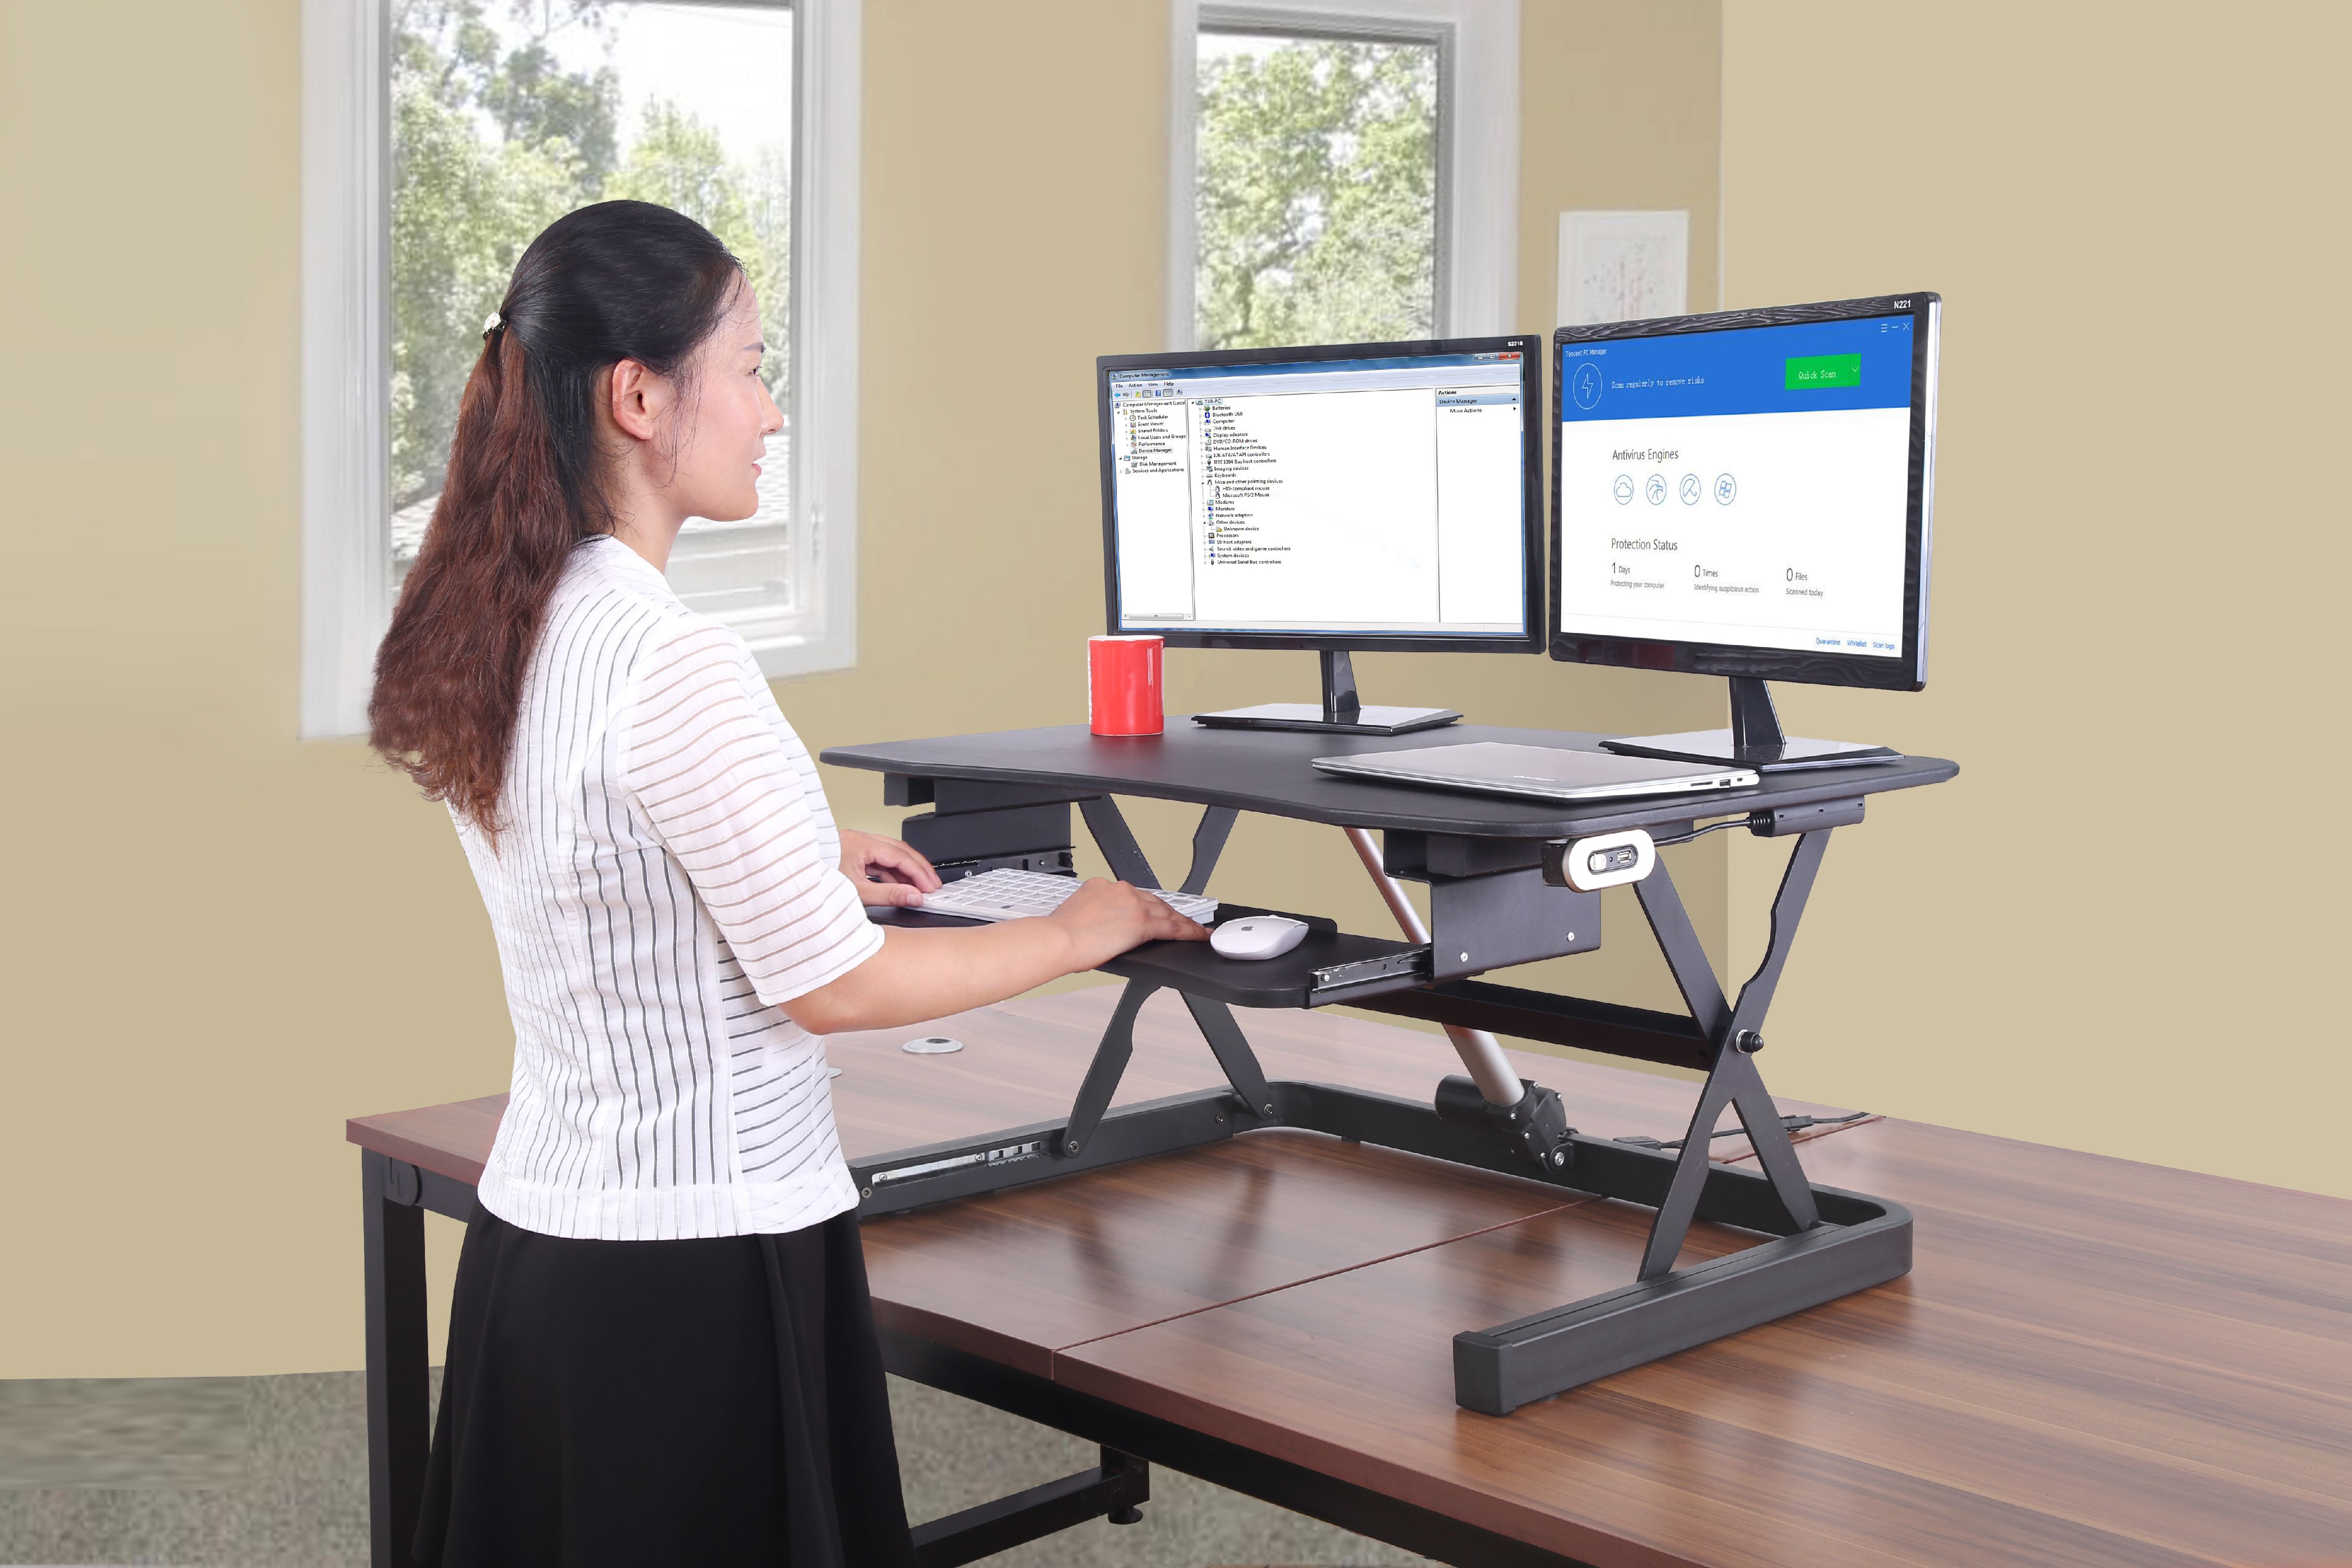 ApexDesk ZT Series Height Adjustable Sit to Stand Electric Desk Converter, 2-Tier Design with Large 36x24" Upper Work Surface and Lower Keyboard Tray Deck (Black) - image 3 of 8